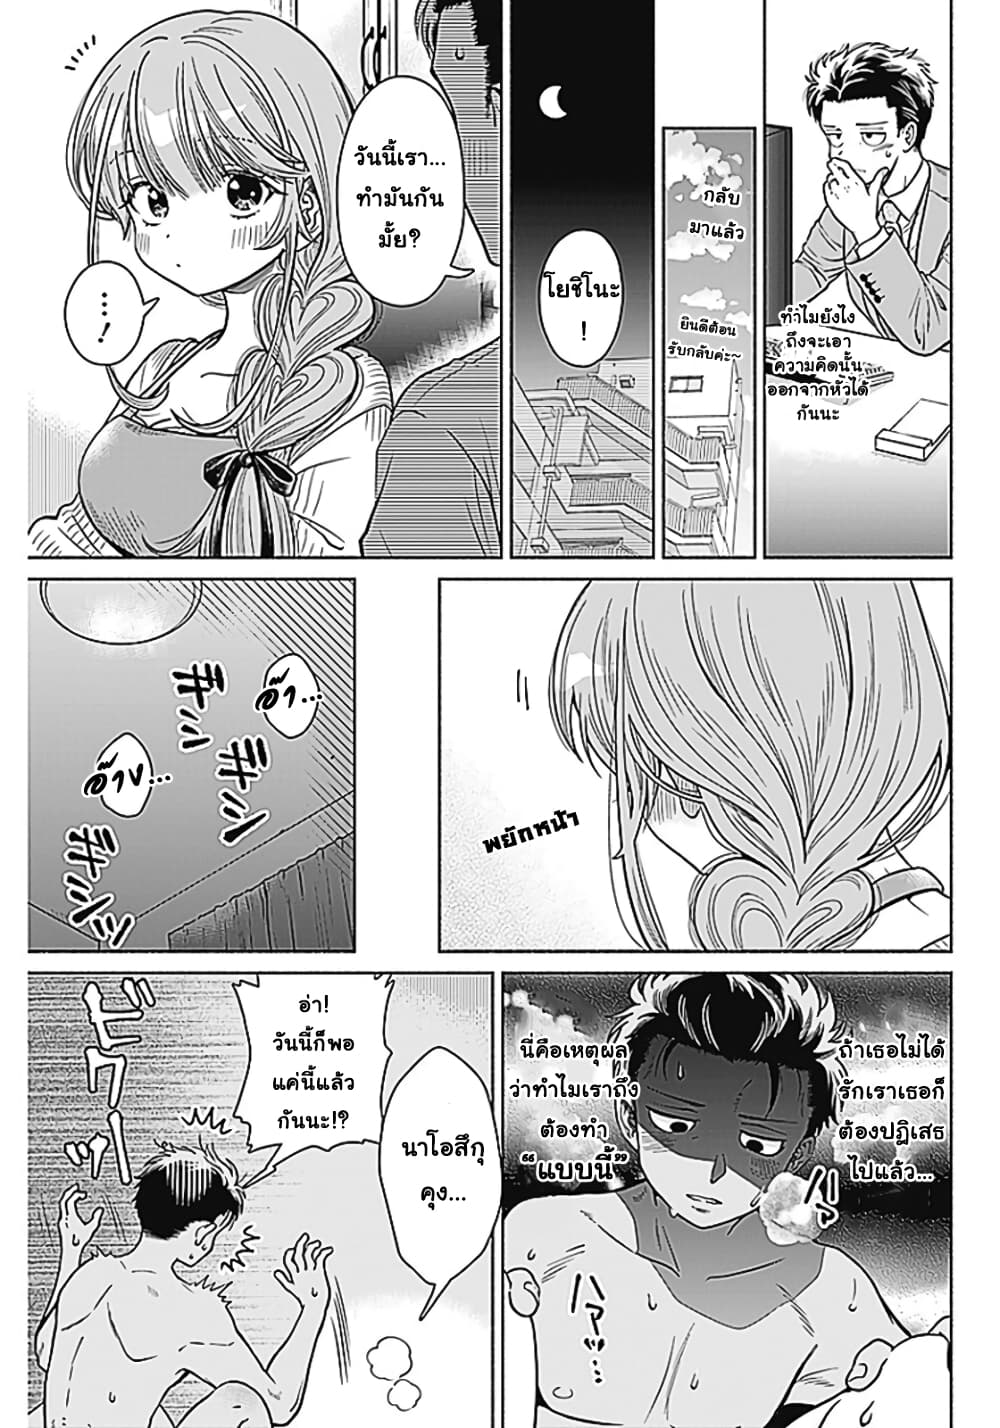 Marriage Gray 1 (10)